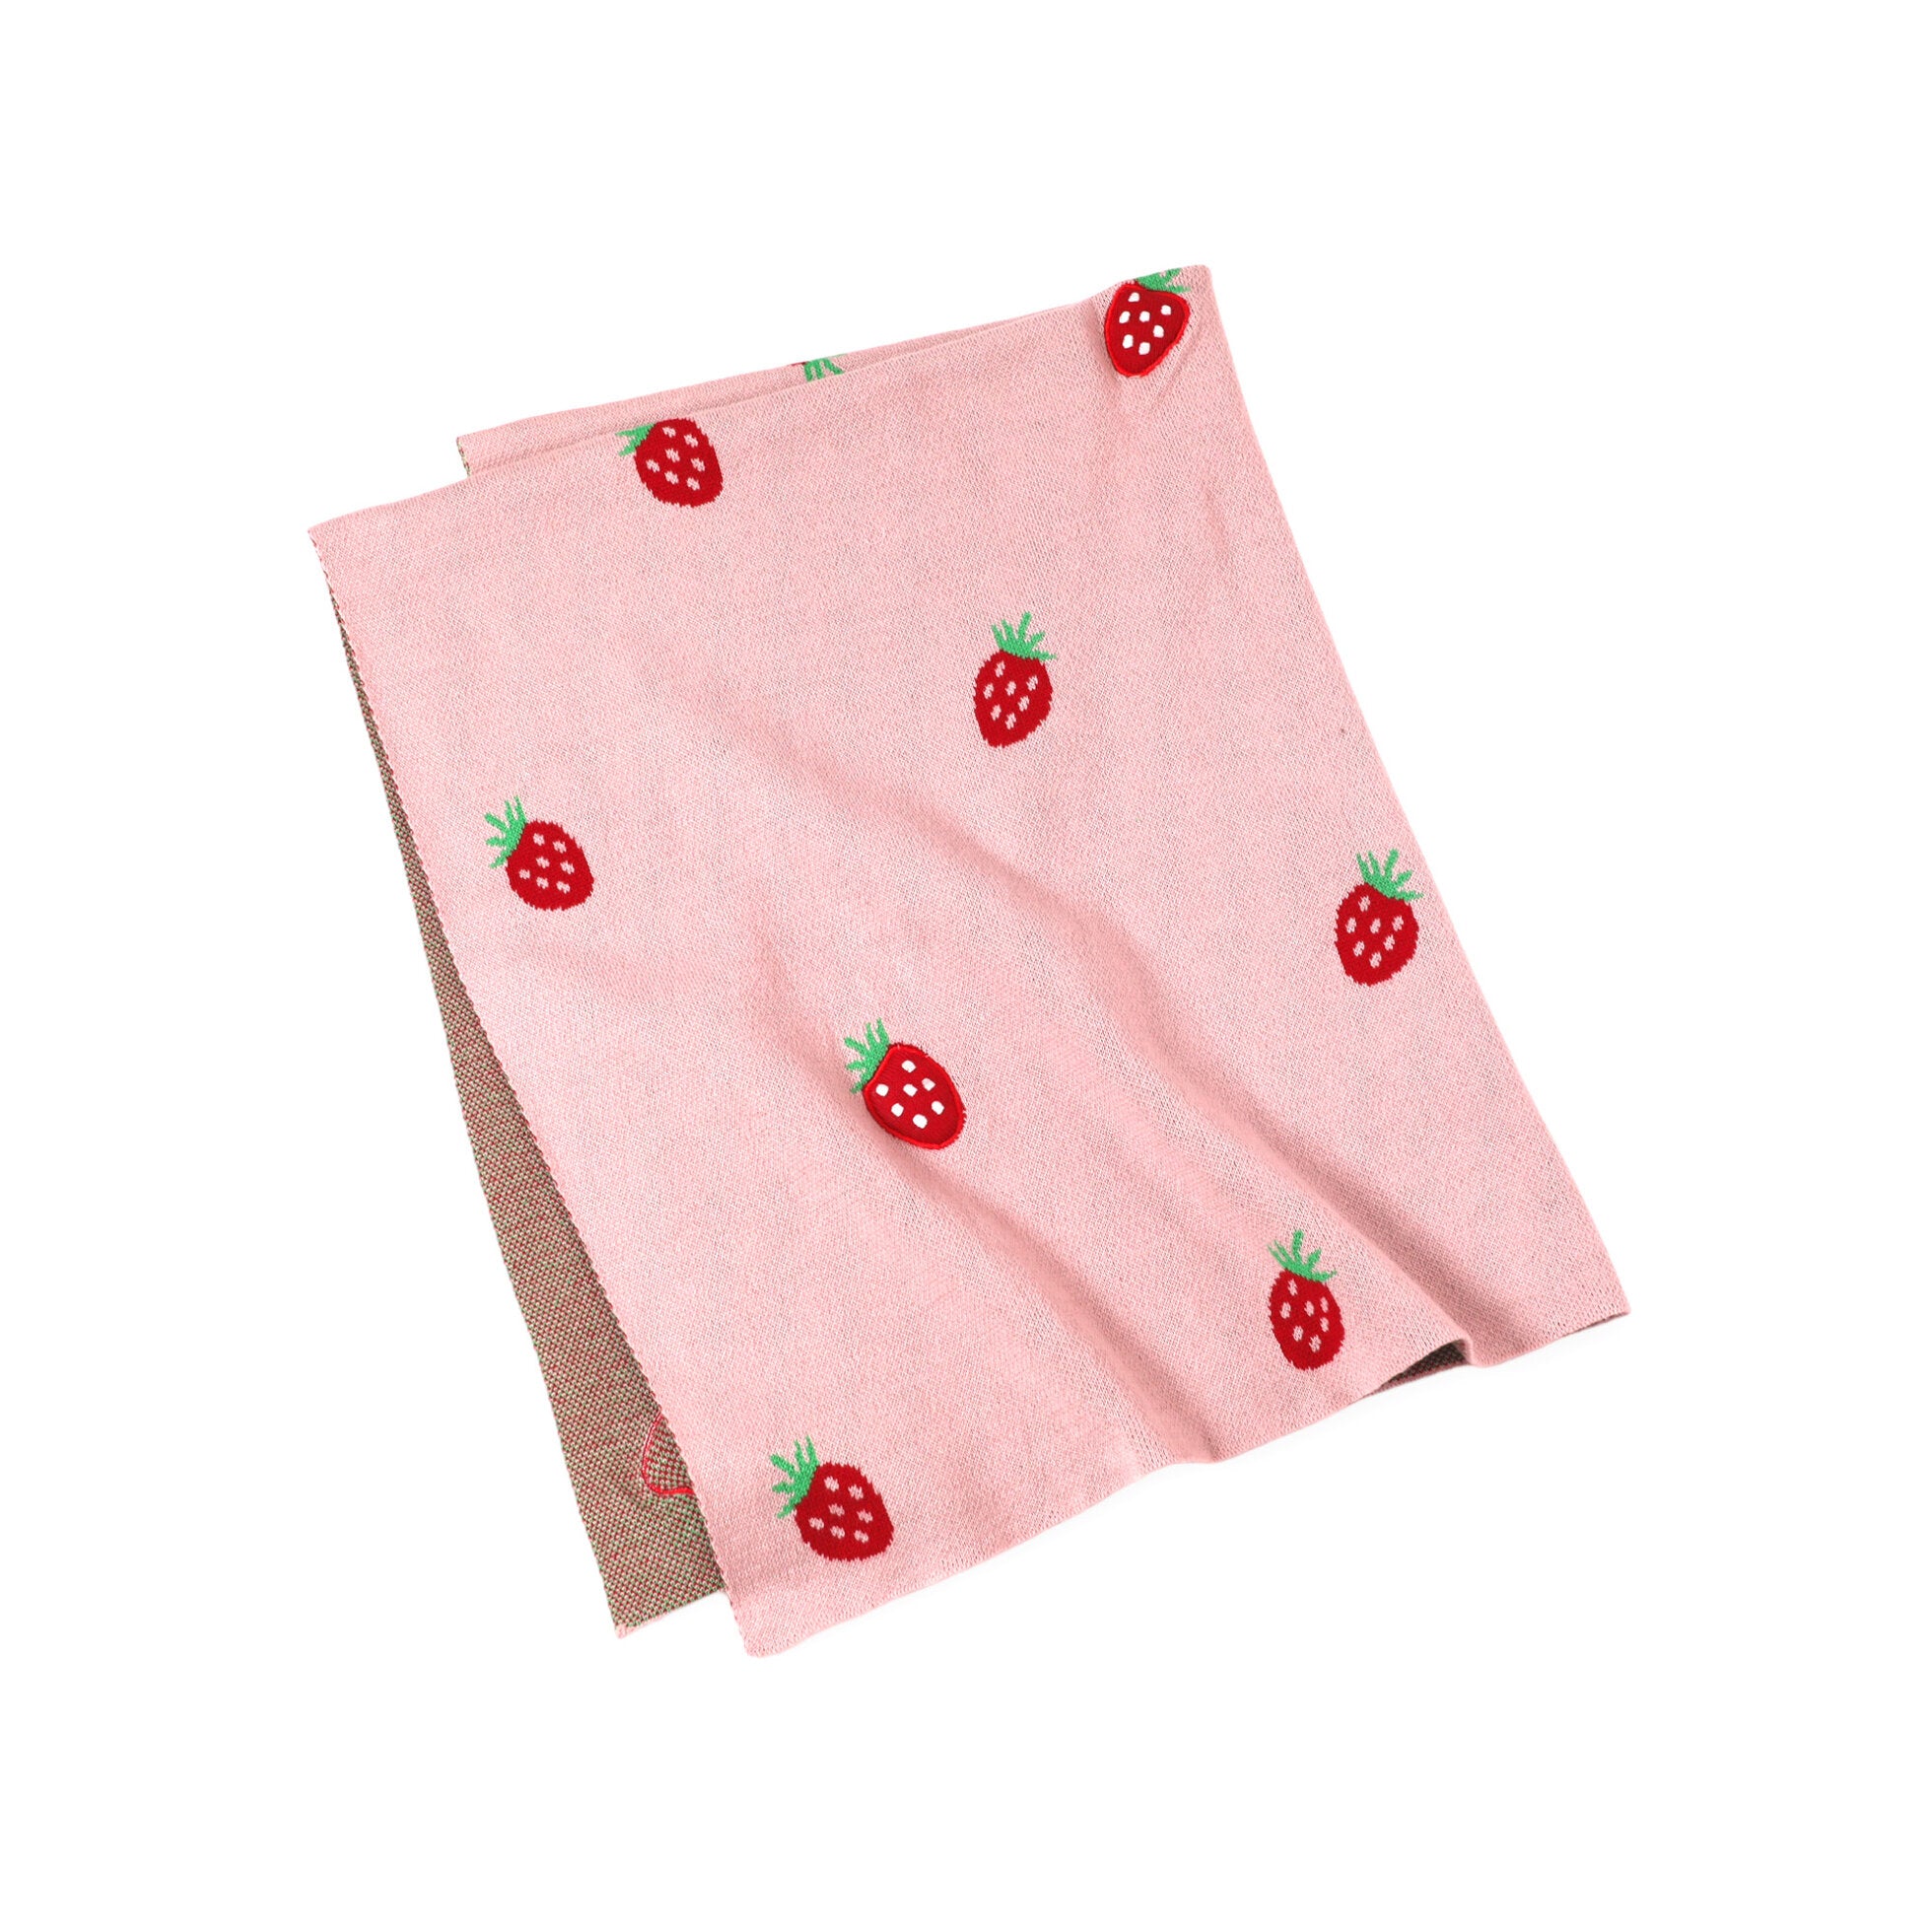 Strawberry - Organic Cotton 3D Jacquard Sweater Knit Baby Blankets